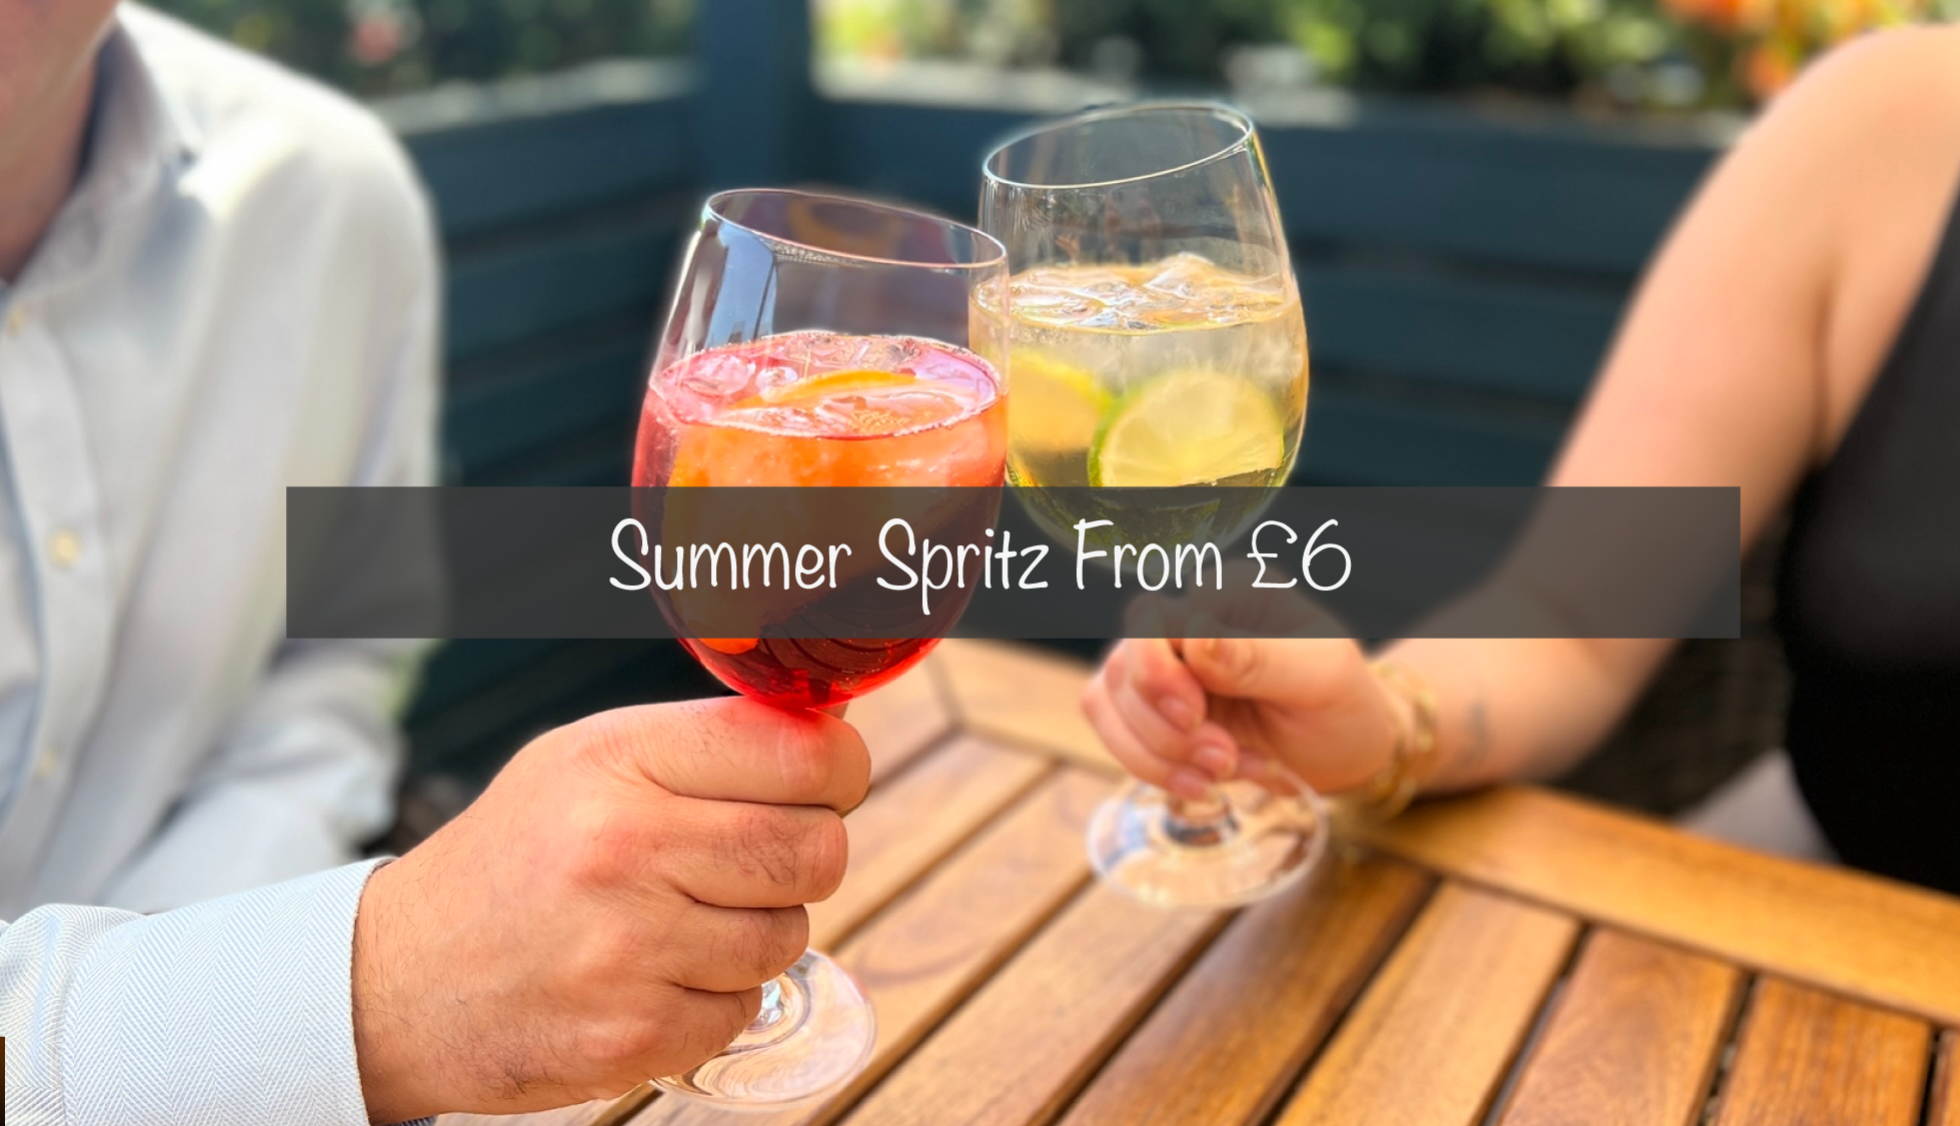 Spritz from £6 cocktail offer at the Hawk Inn